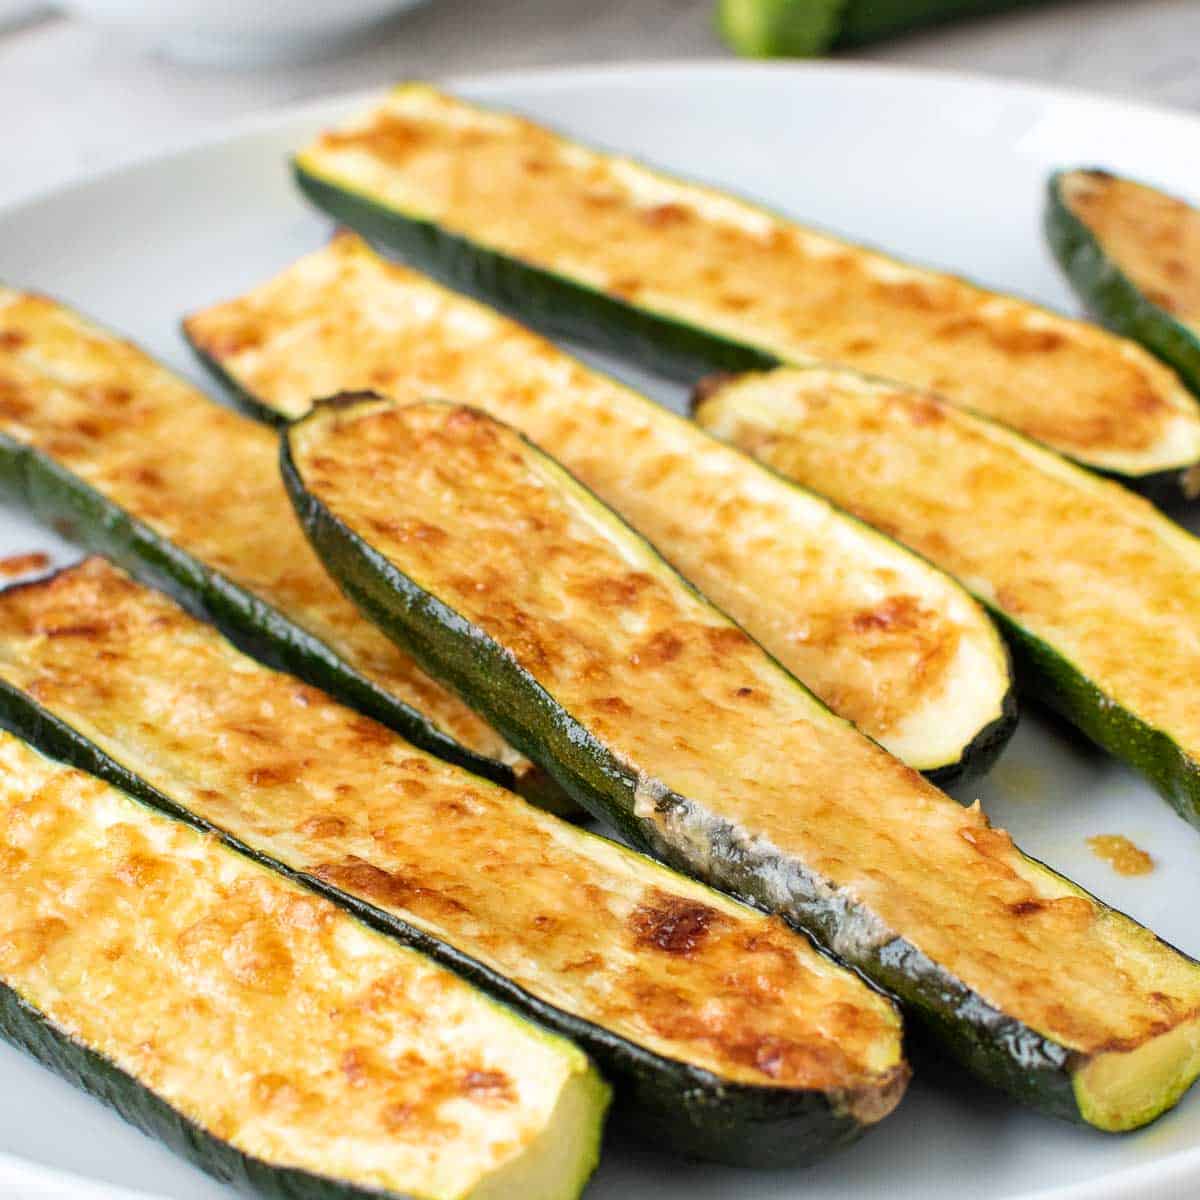 andrea aller recommends pictures of zucchini pic